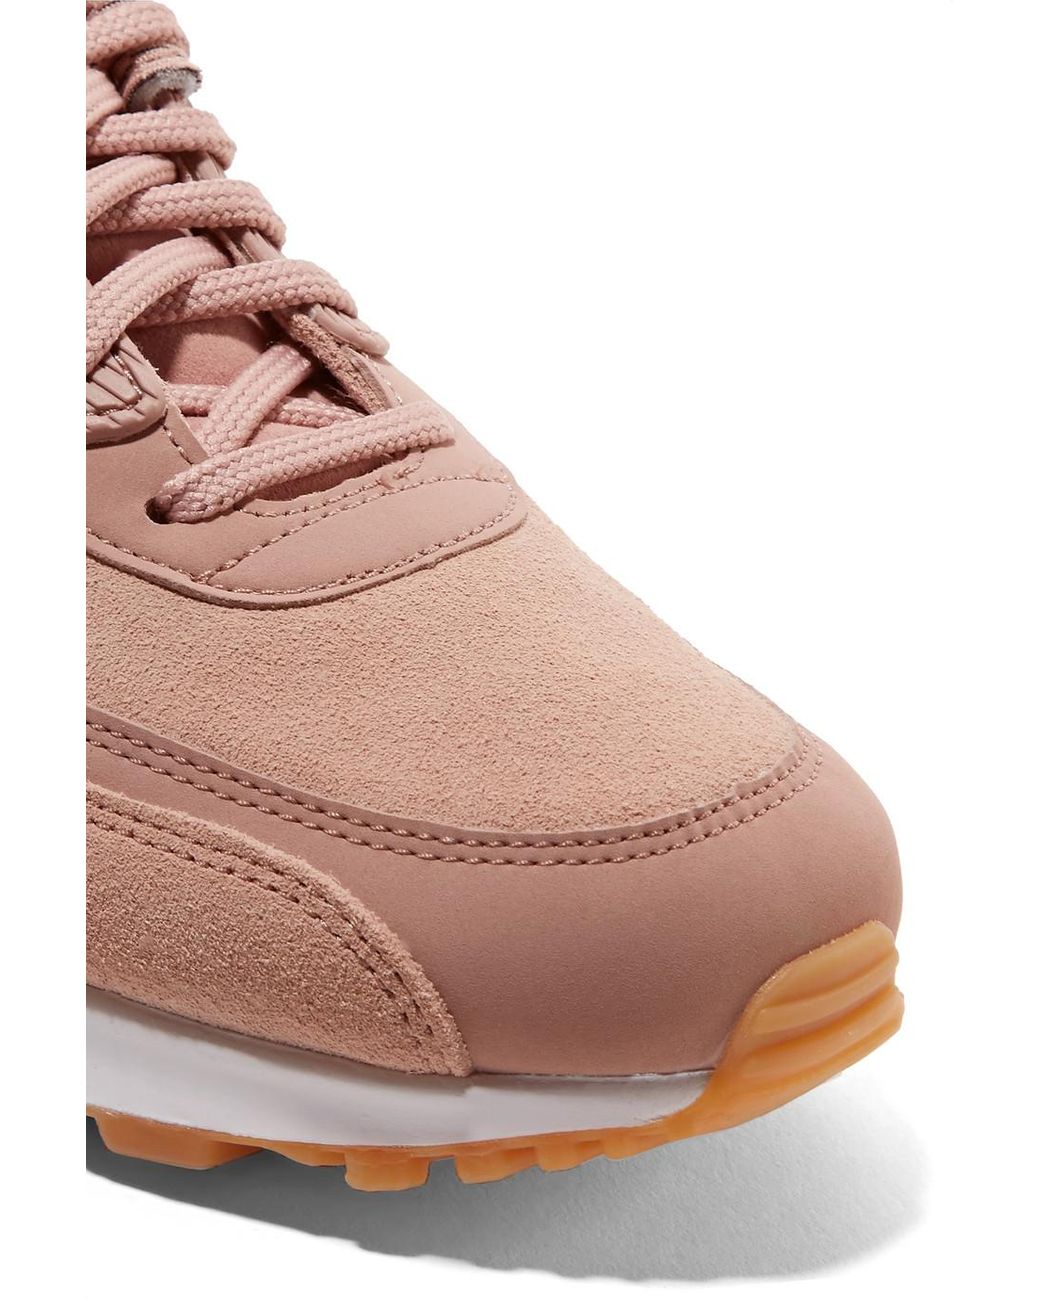 Nike Air Max 90 Suede-trimmed Leather Sneakers in Antique Rose (Pink) | Lyst